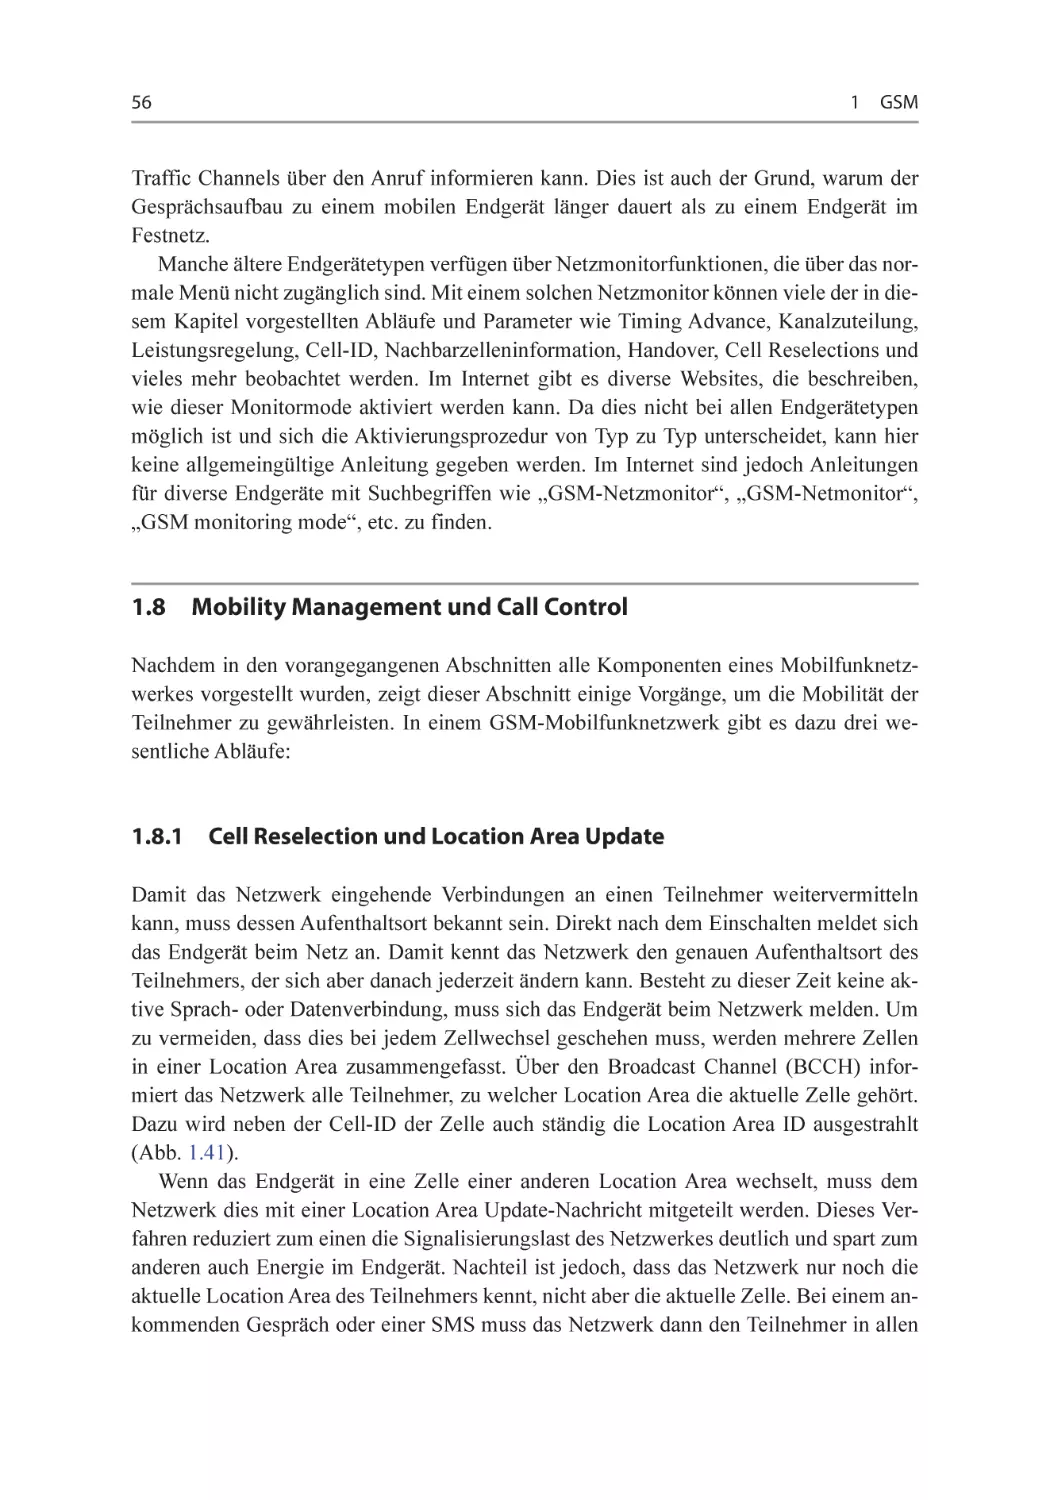 1.8﻿ ﻿﻿﻿Mobility Management und Call Control
1.8.1﻿ ﻿﻿﻿Cell Reselection und Location Area Update﻿﻿﻿﻿﻿